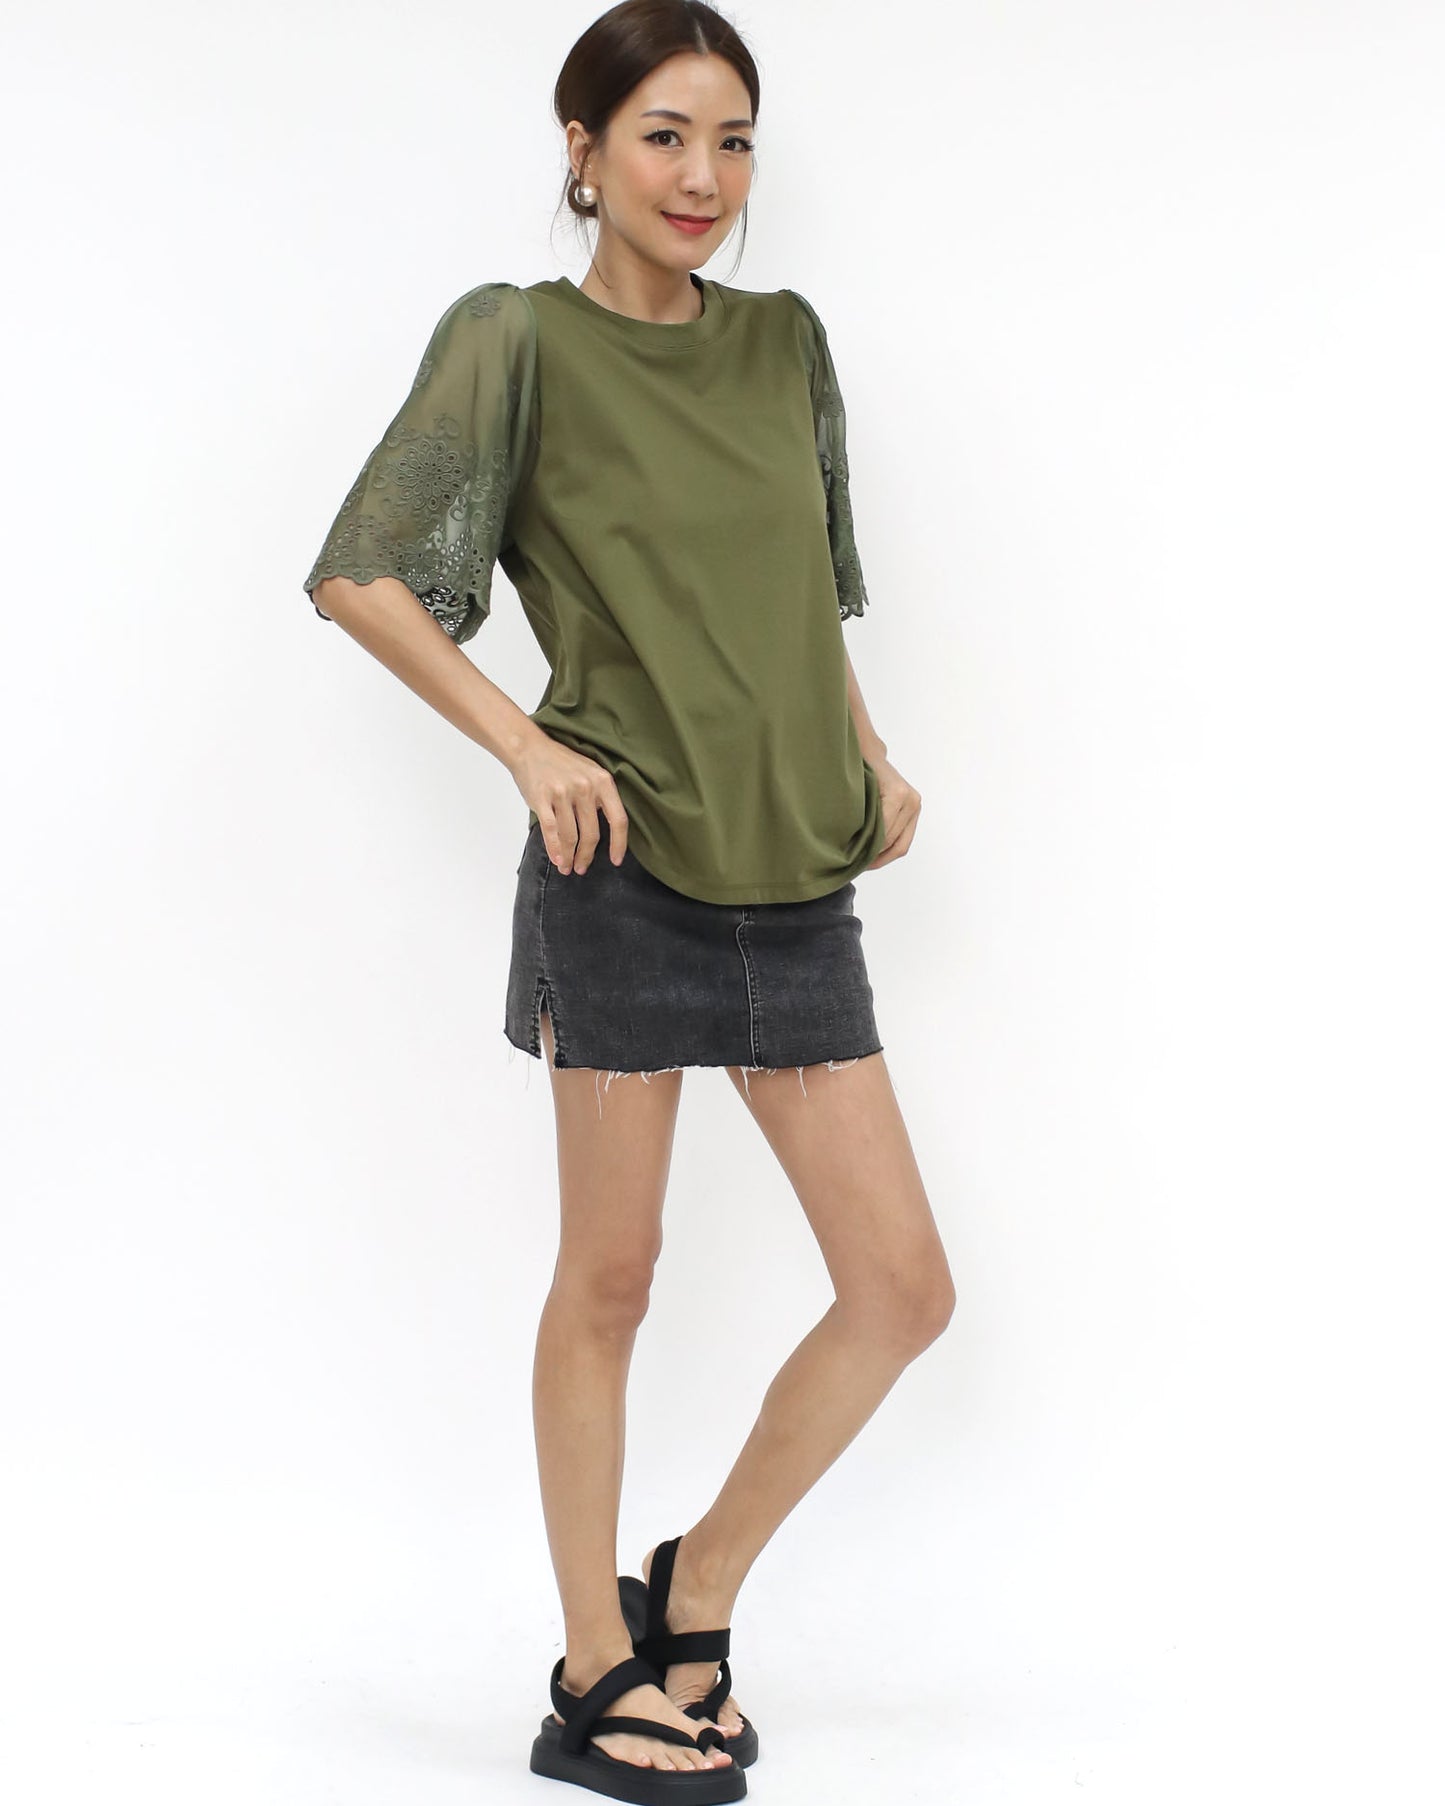 green w/ lace mesh sleeves tee